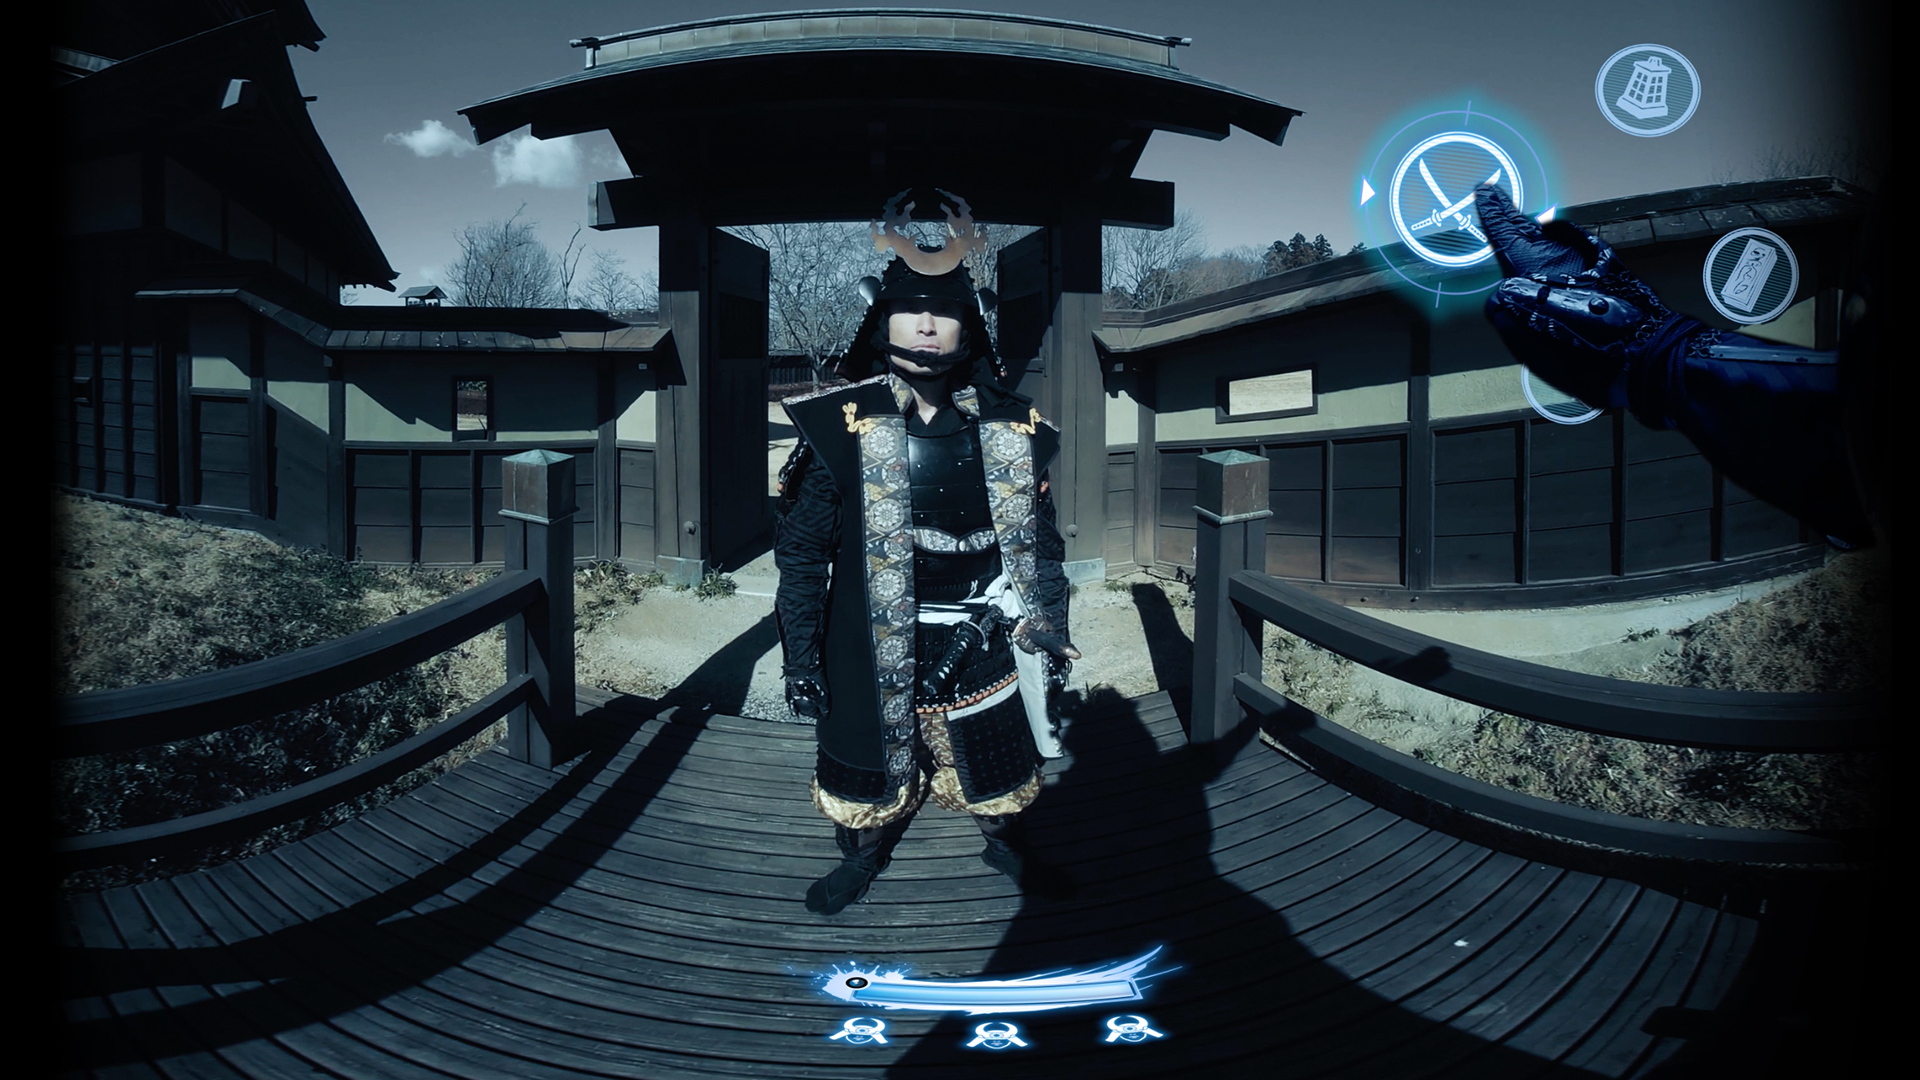 Independent Filmmaker Dorian Goto Stone's Live-Action Virtual Reality Film "GEIMU" About a Medieval Japanese Game World Has Festival World Premiere at VIFF